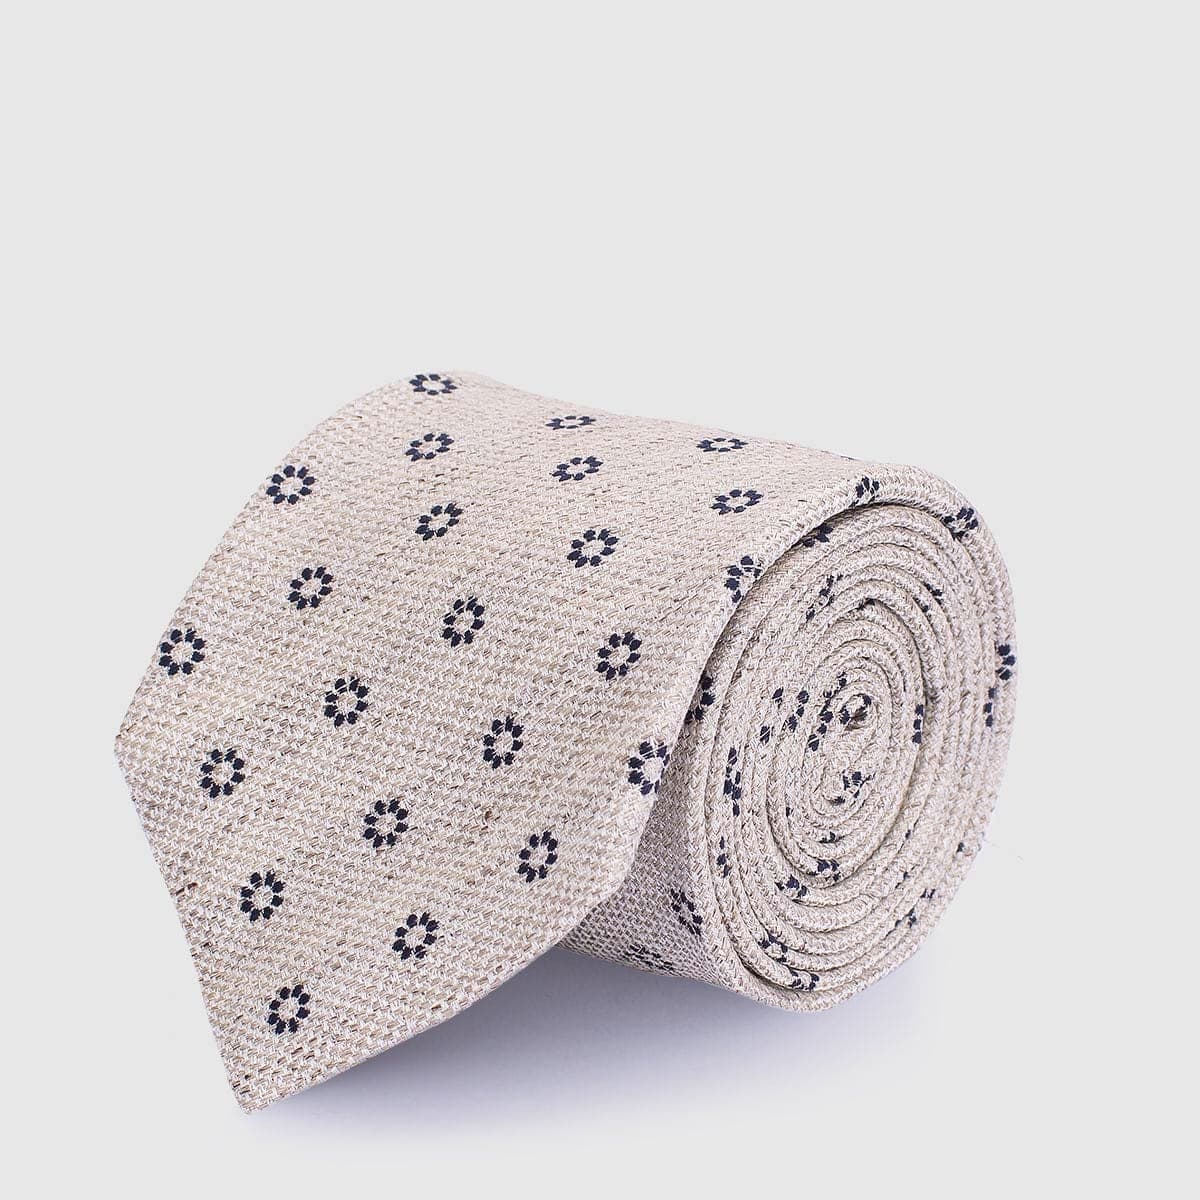 5 Fold beige tie with blue dots